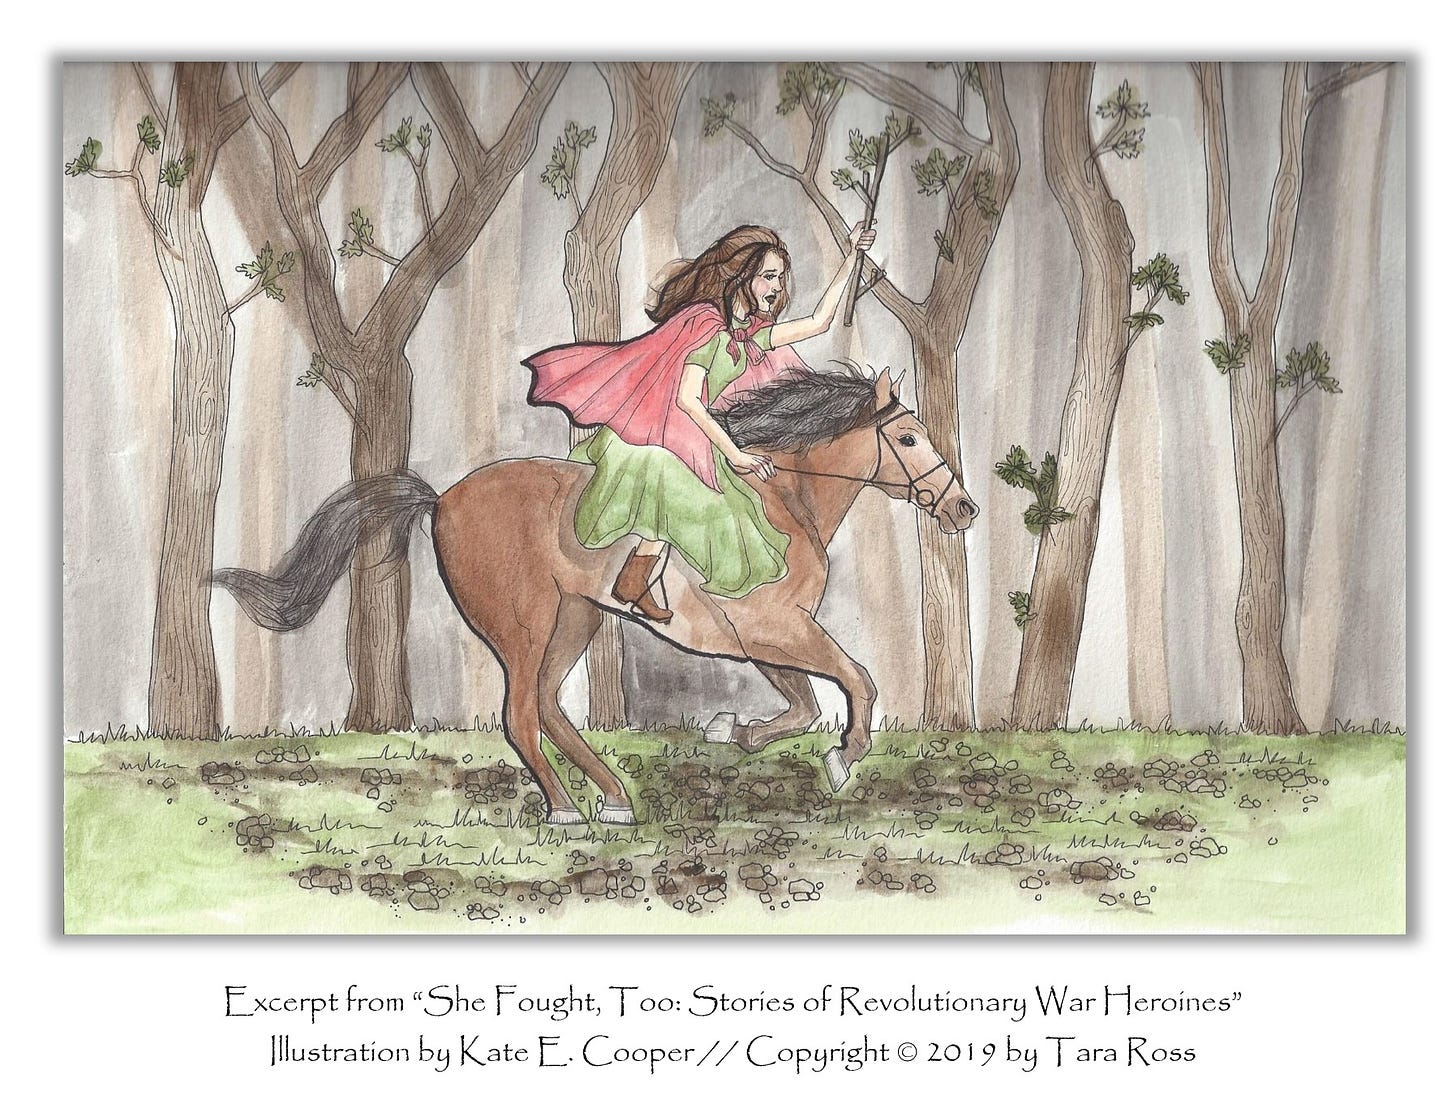 Illustration of Sybil Ludington from "She Fought Too: Stories of Revolutionary War Heroines" by Tara Ross. Illustrations by Kate E. Cooper.